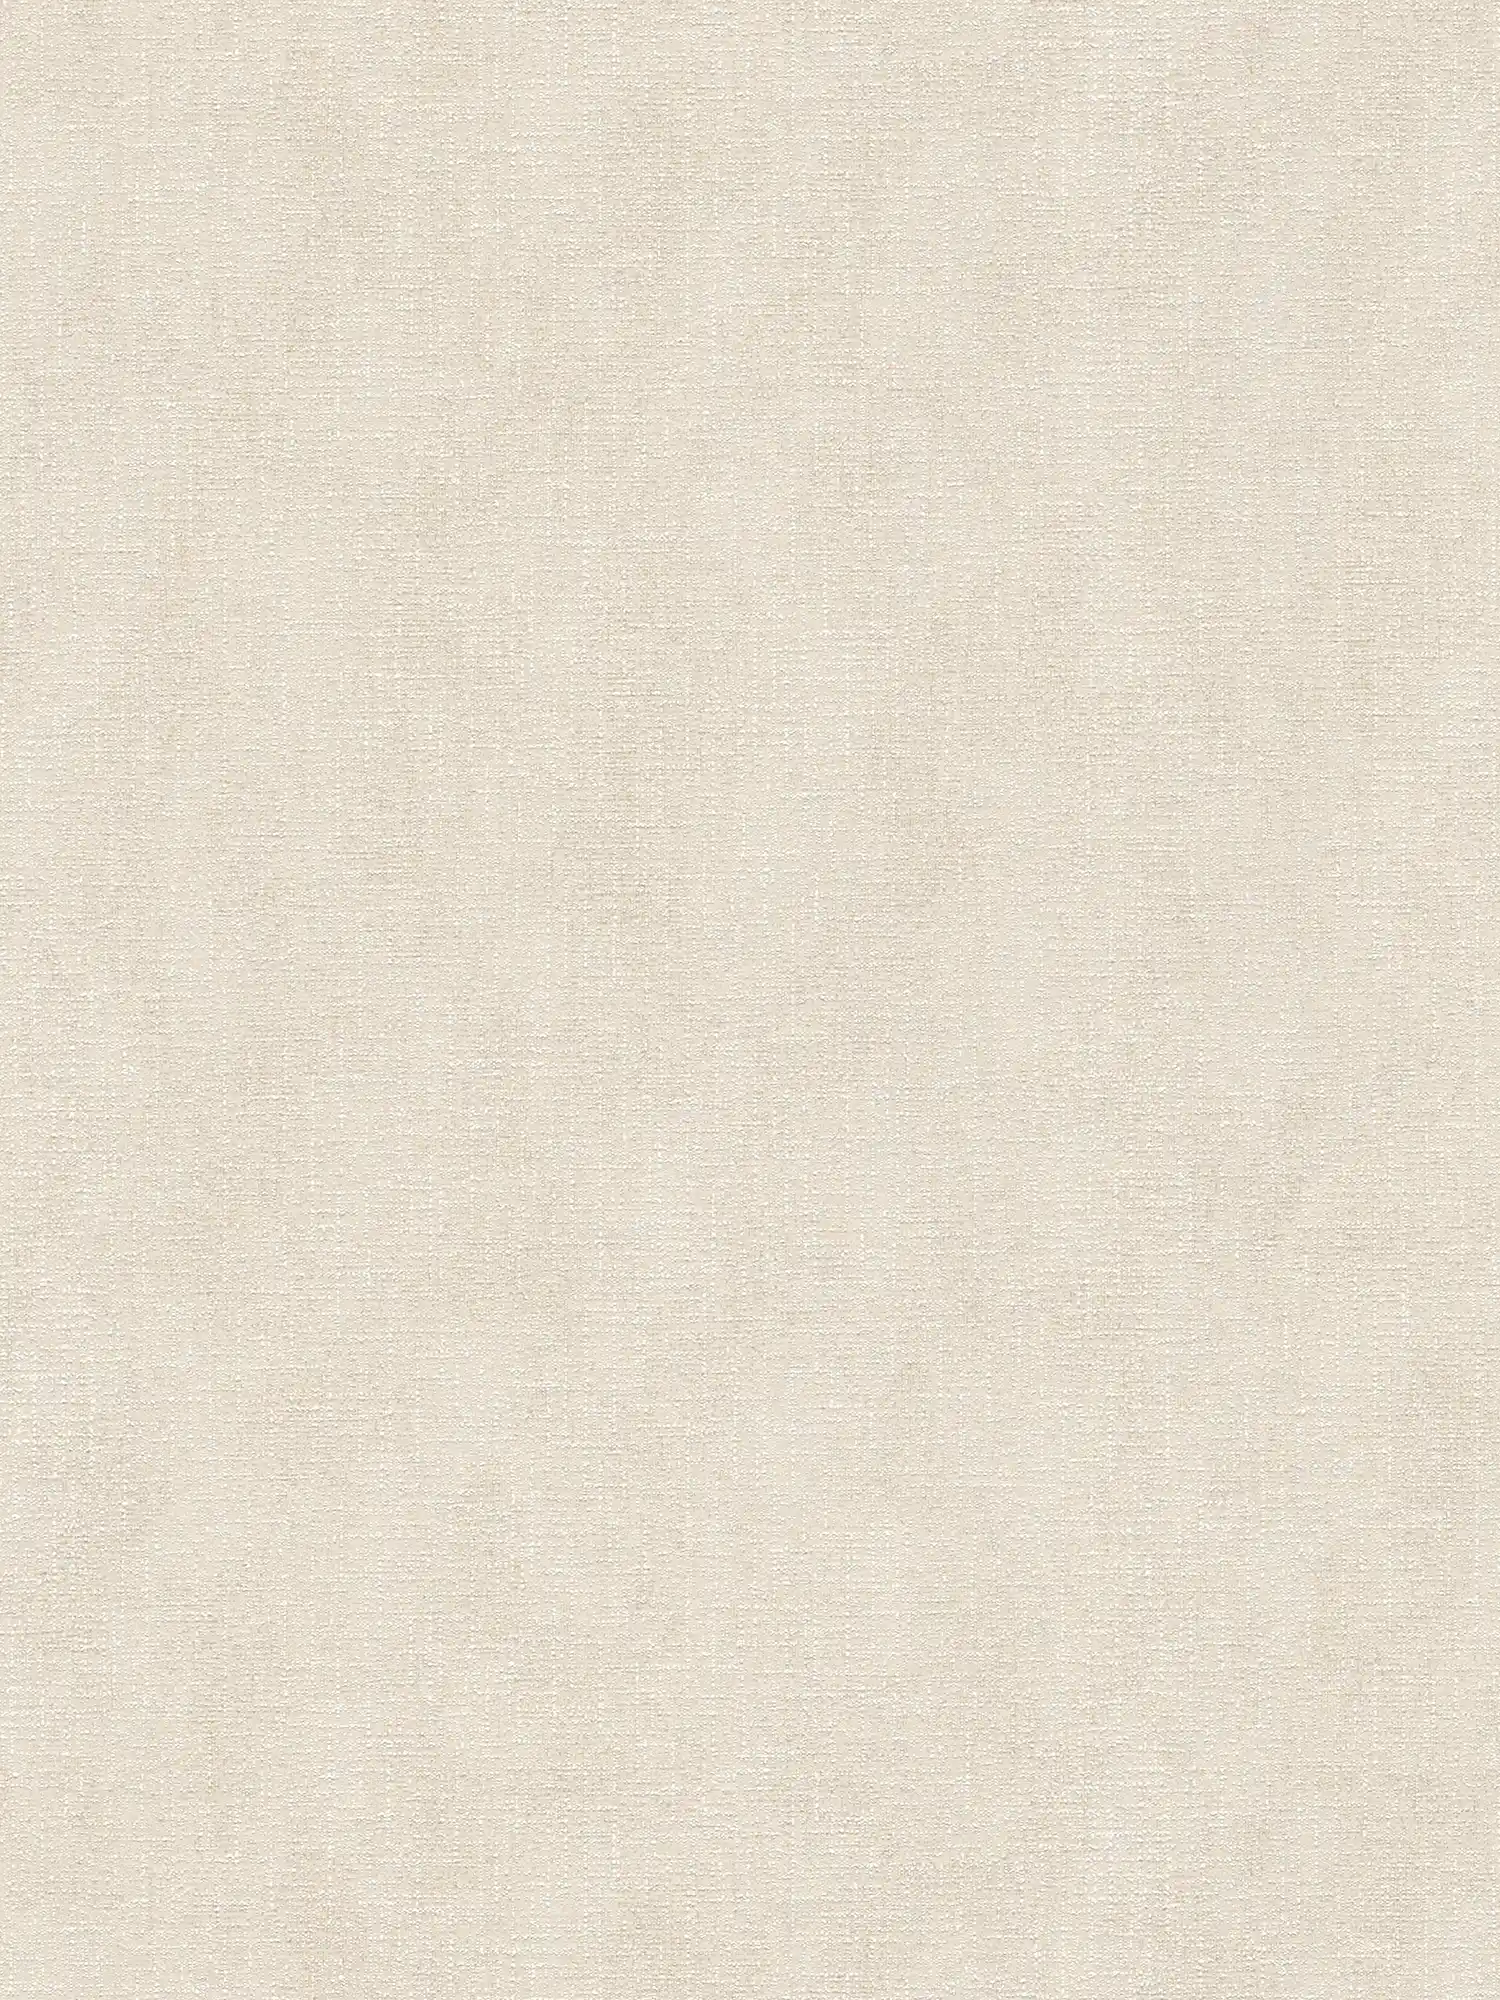 Wallpaper cream white with textile optics & shimmer effect - beige
